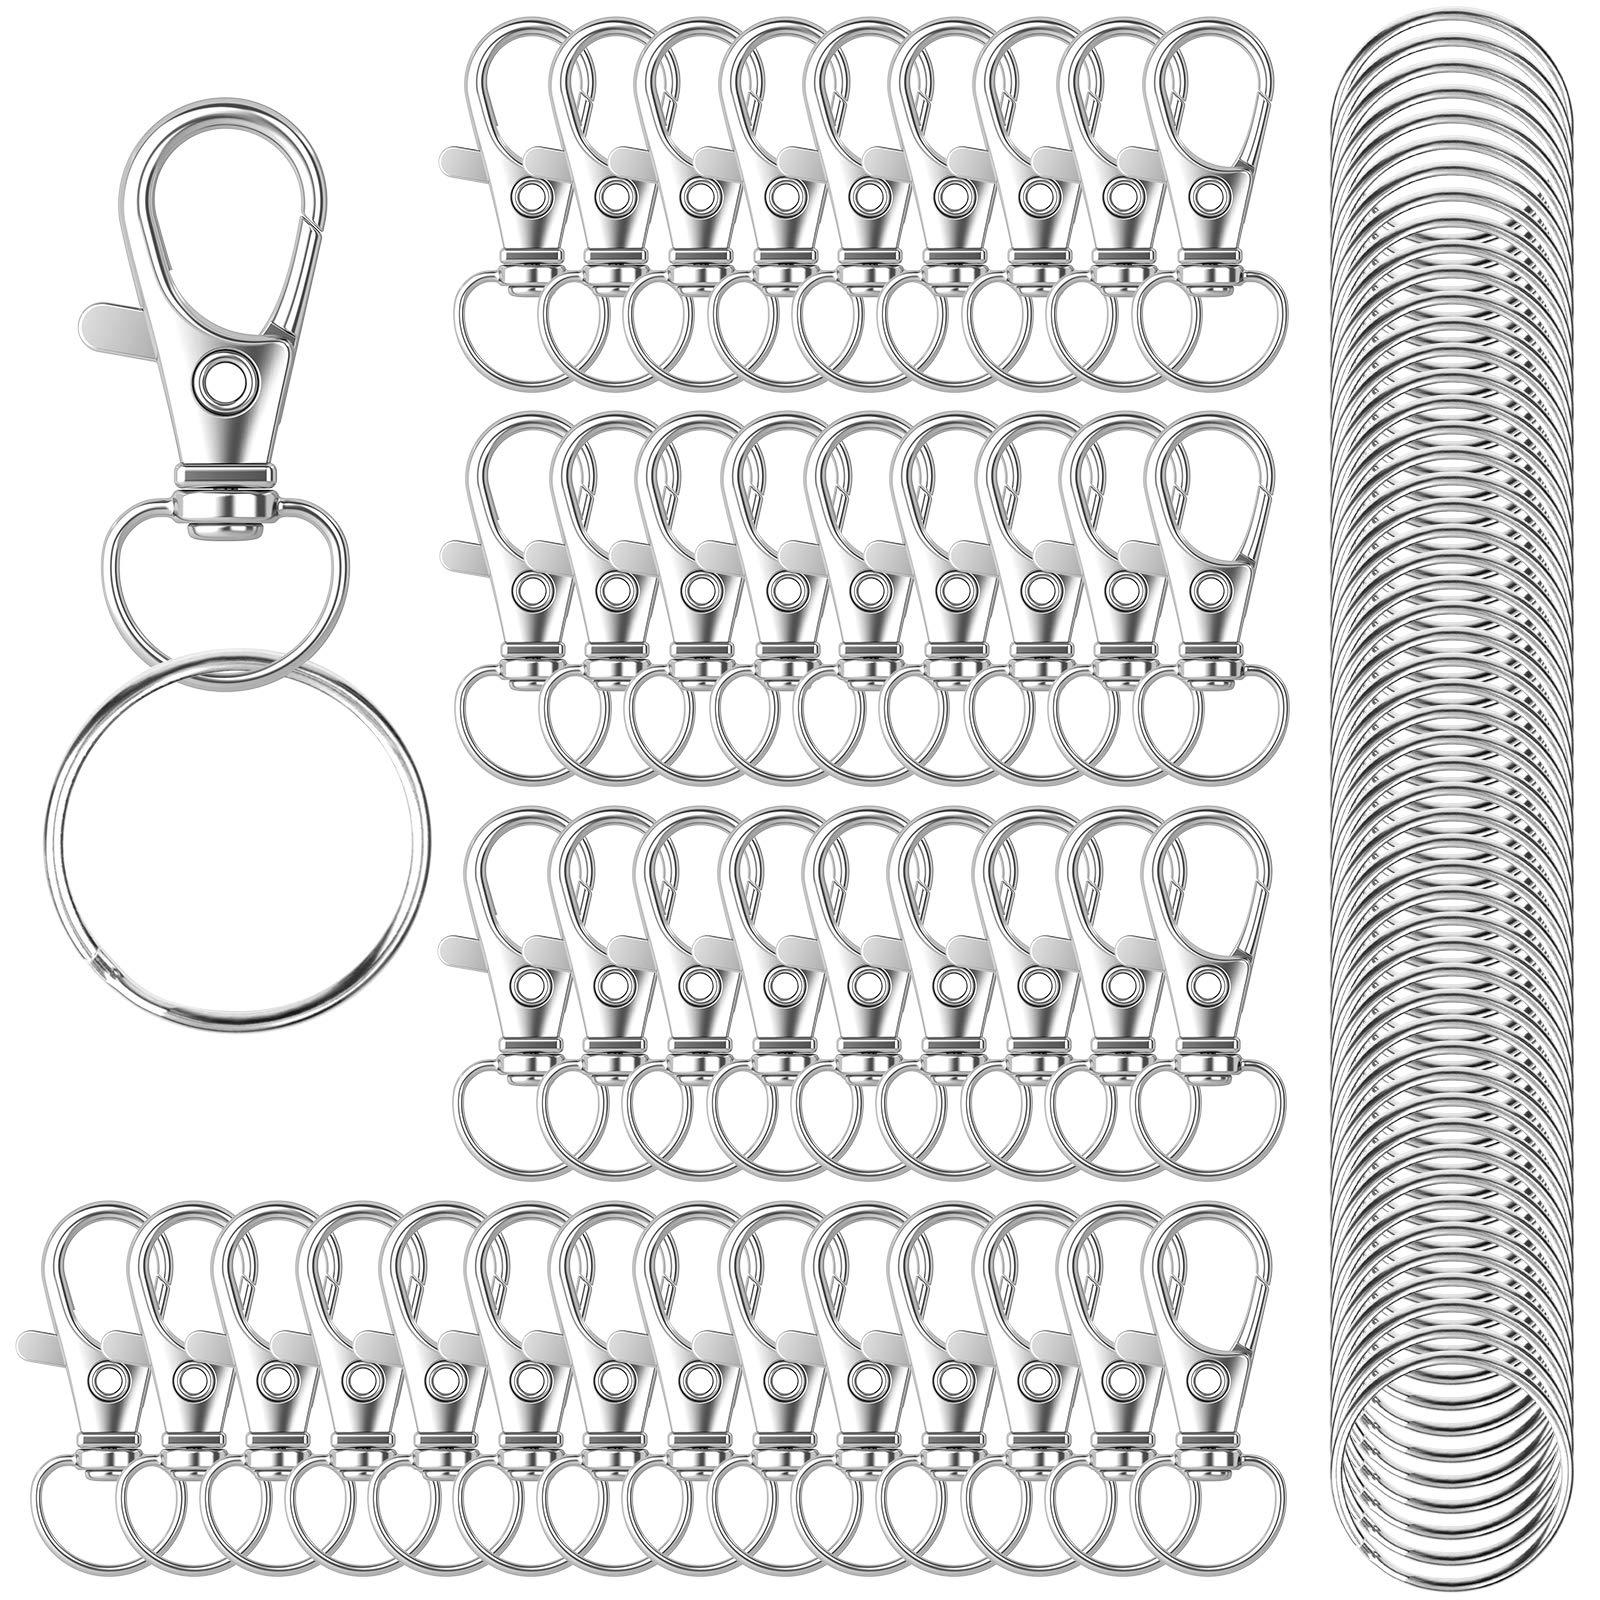 DSUWAZU 100pcs Keychain Hooks with Key Rings Metal Swivel Lobster Claw Clasps for Keychain Clip Lanyard Jewelry Making Crafts (Silver)